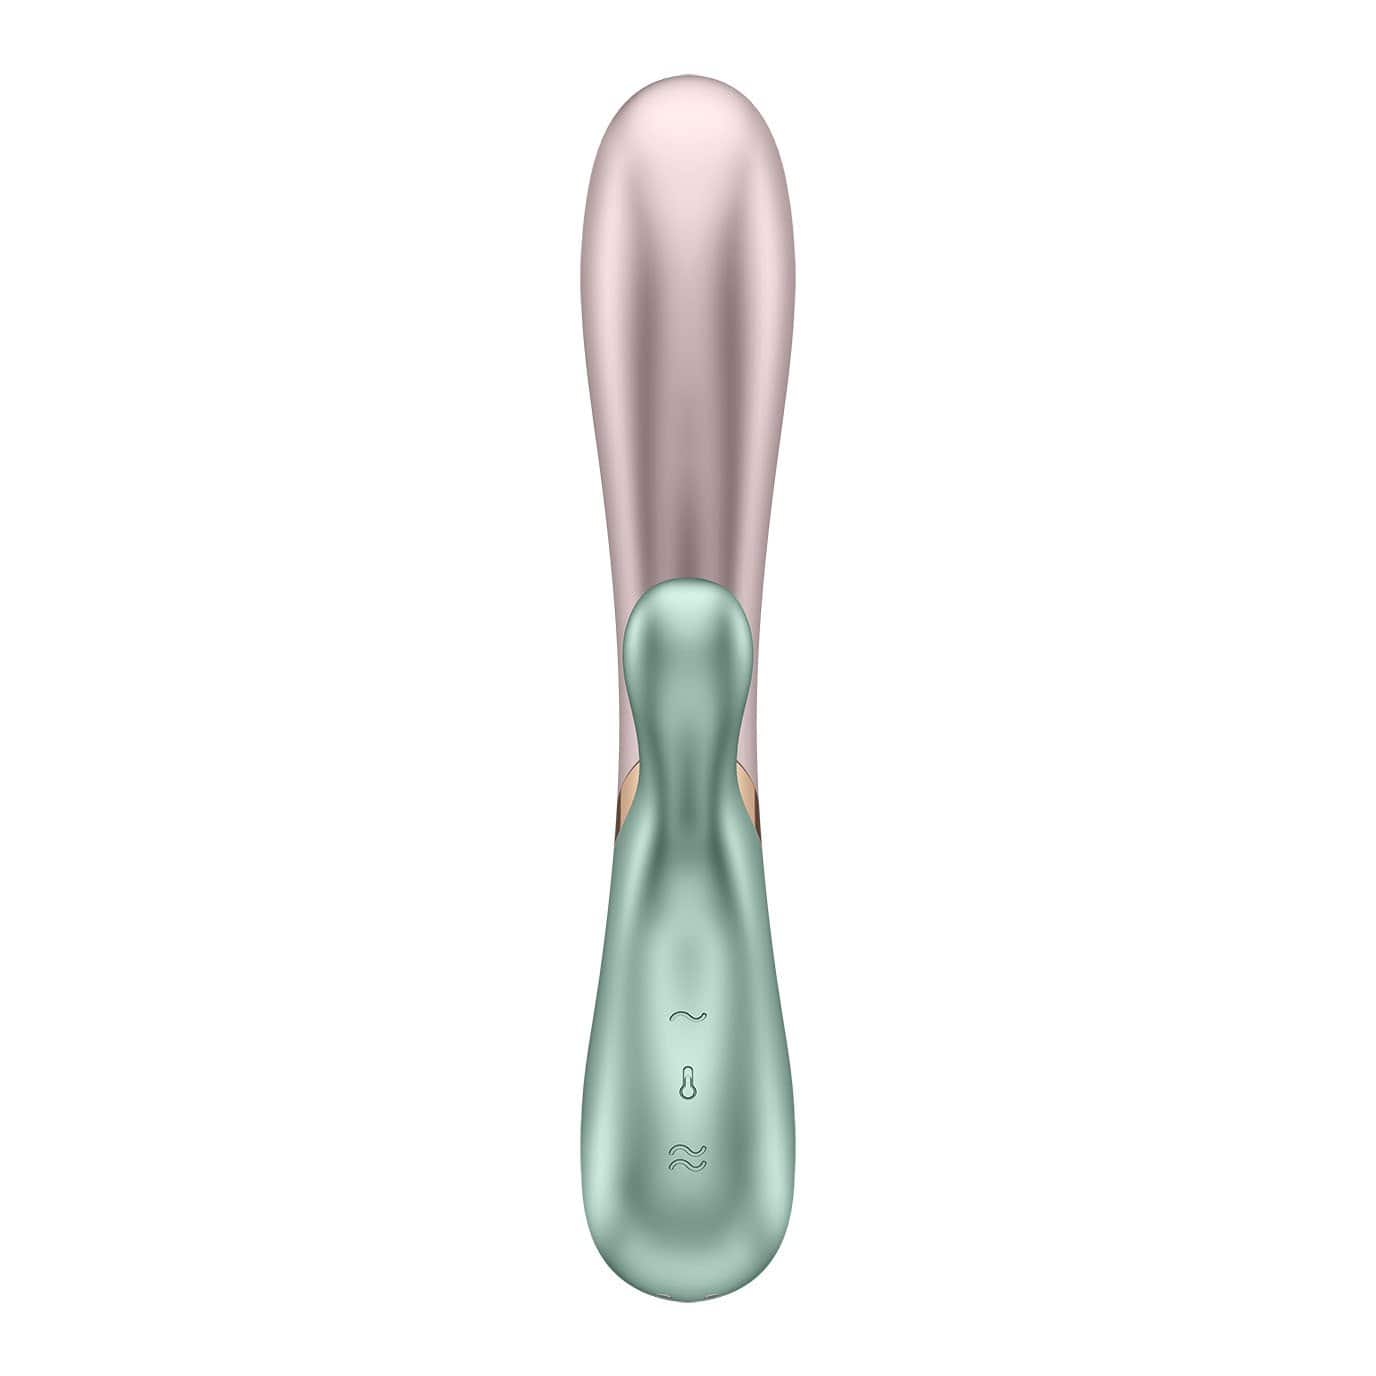 Satisfyer - Hot Lover Warming Rabbit Vibrator with Bluetooth and App (Pink/Mint) -  Rabbit Dildo (Vibration) Rechargeable  Durio.sg